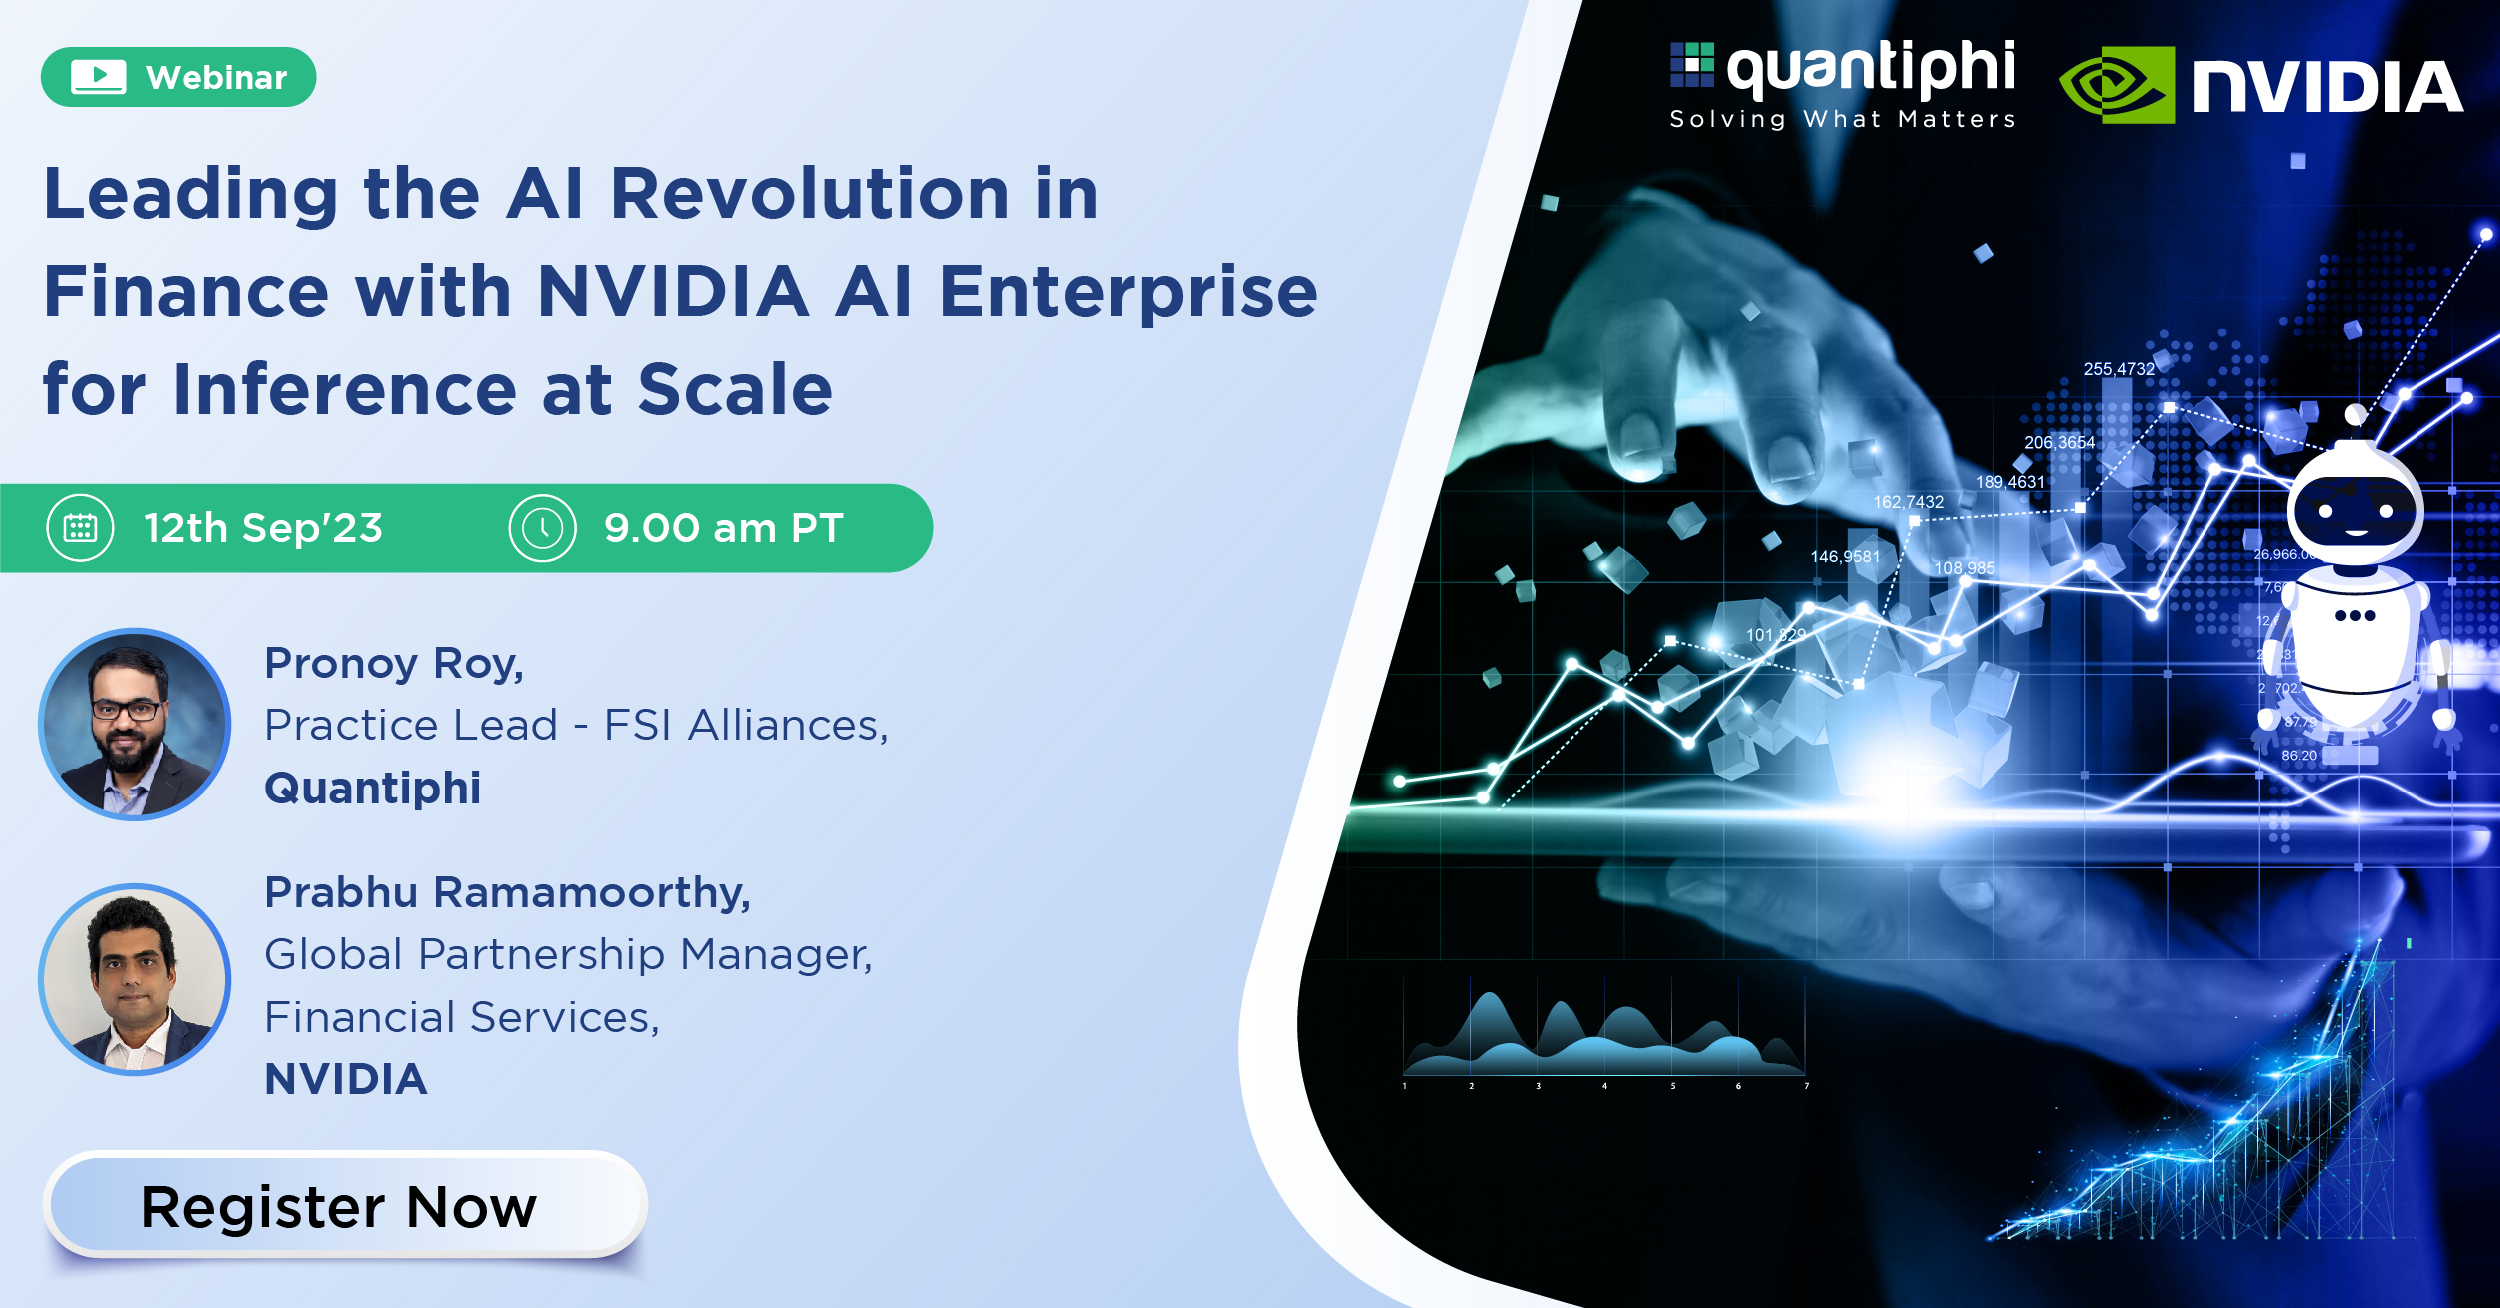 Leading the AI revolution in finance with NVIDIA AI enterprise for inference at scale